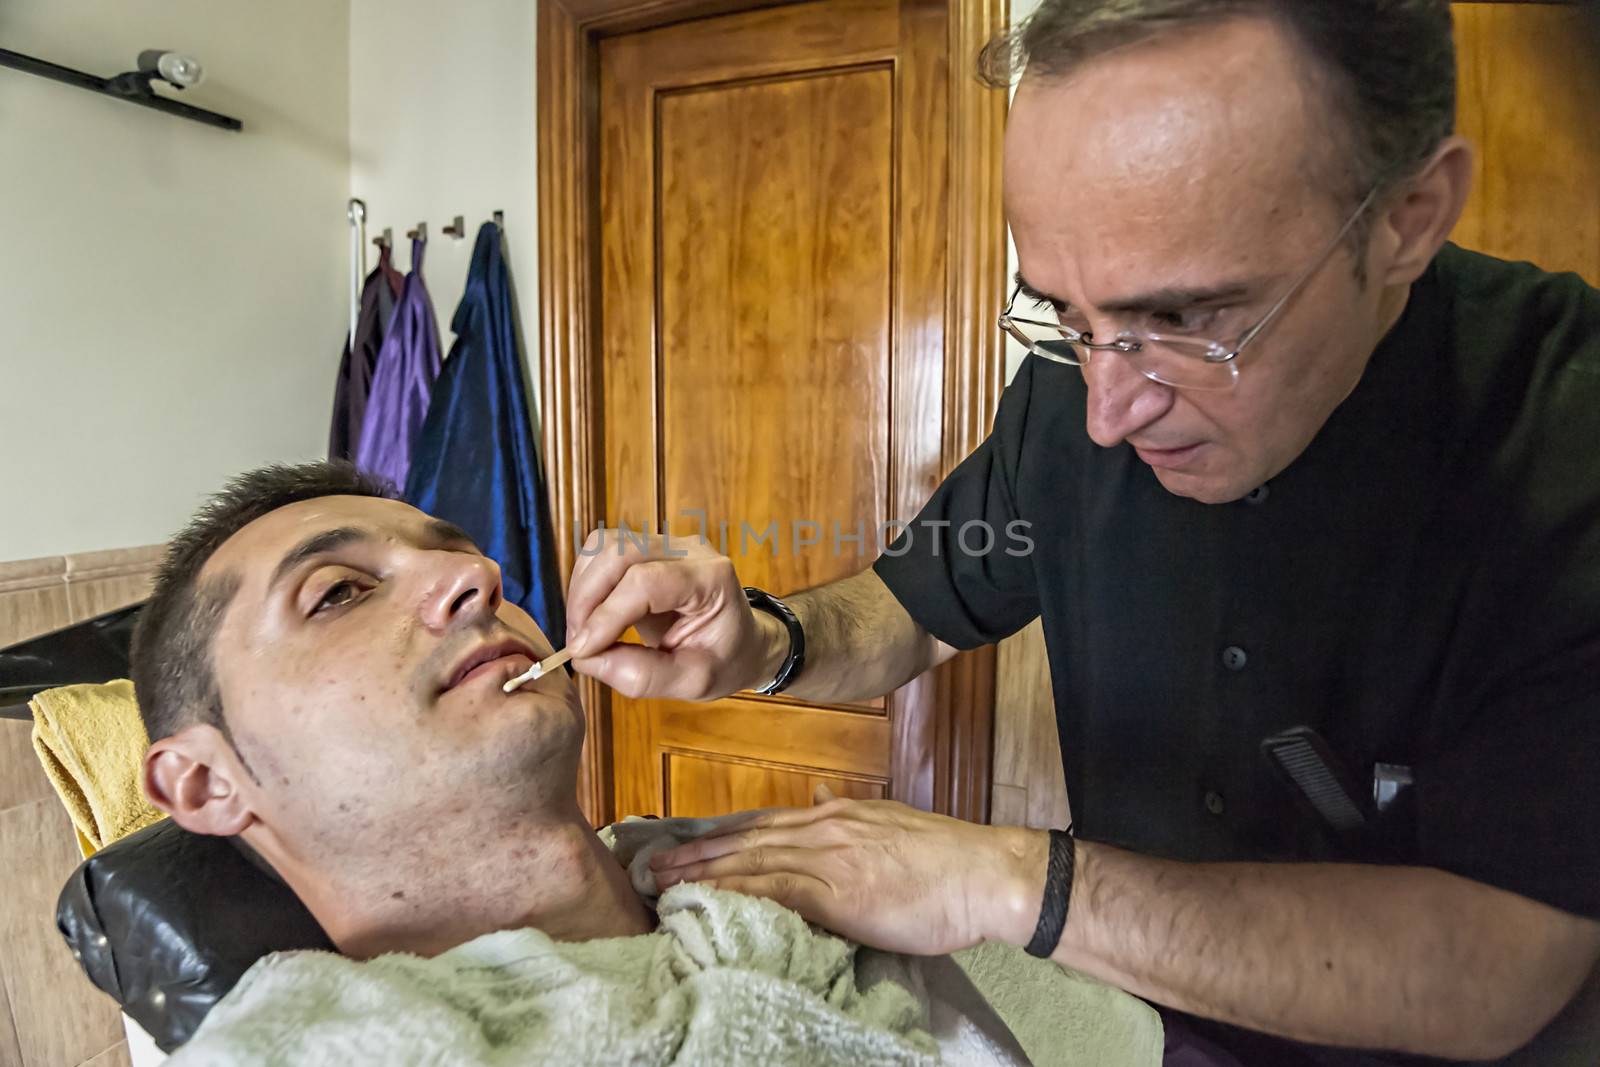 barber treats small wounds after shaving with razor in a barber' by digicomphoto